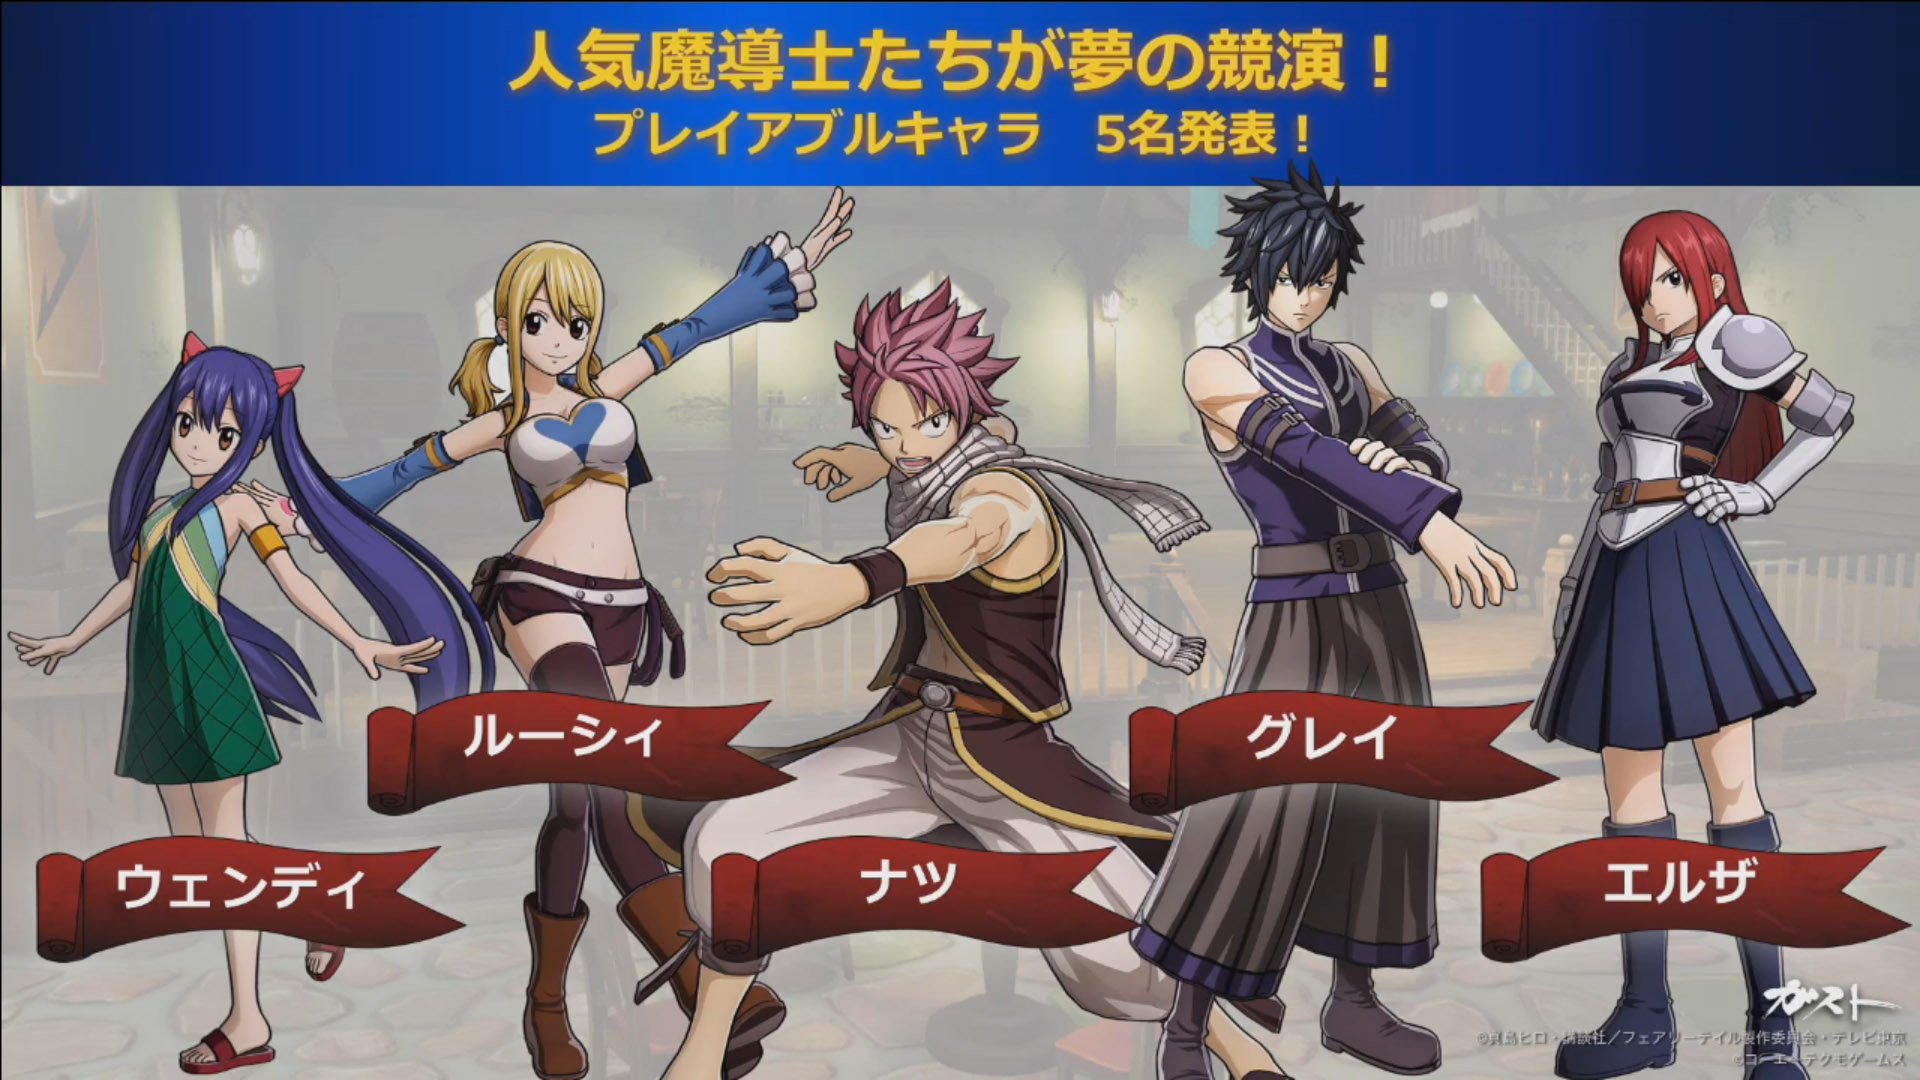 Fairy Tail Tgs 2019 Details Character Trailer And Screenshots